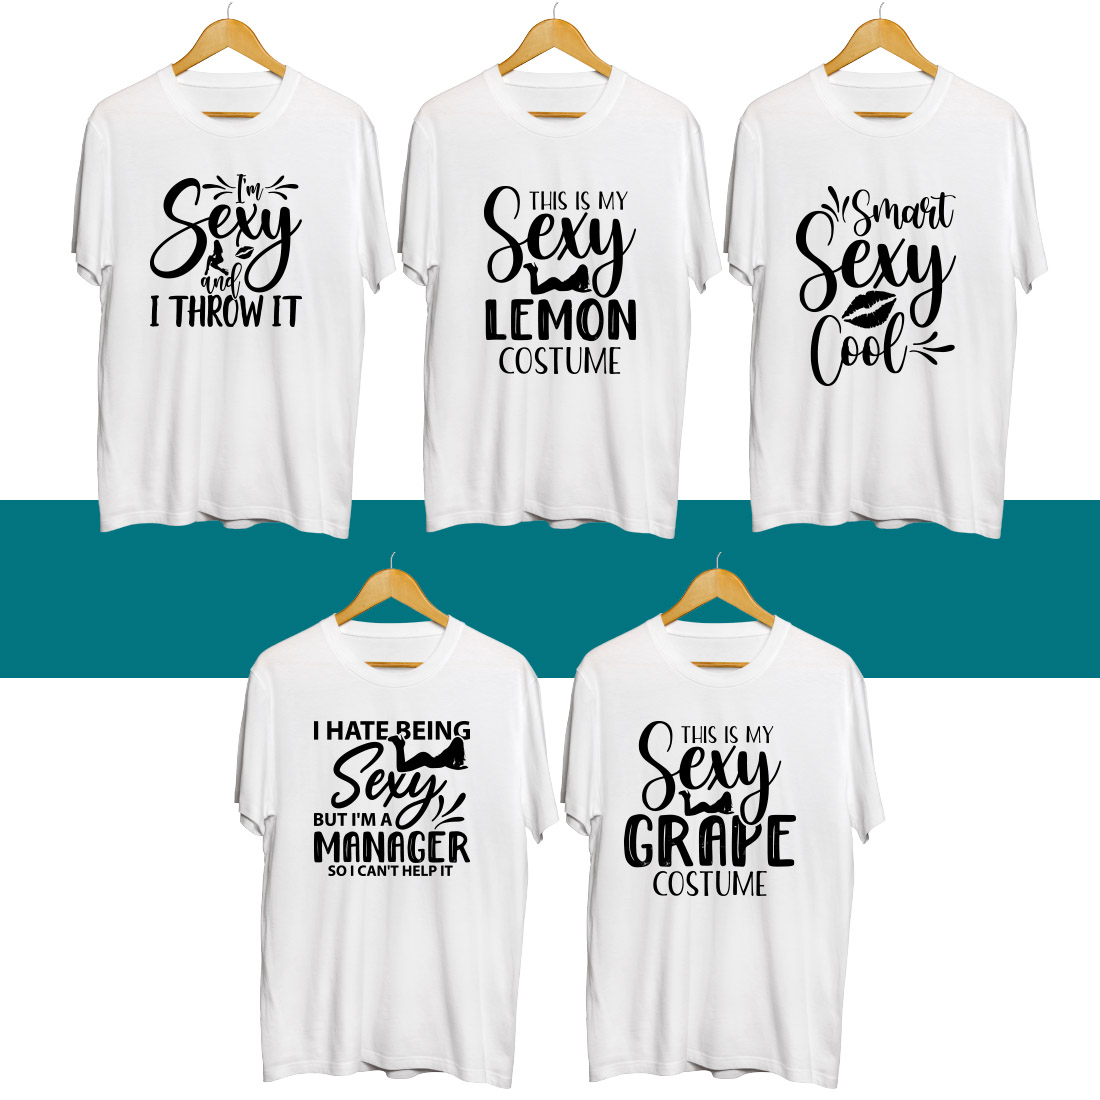 Six t - shirts with different sayings on them.